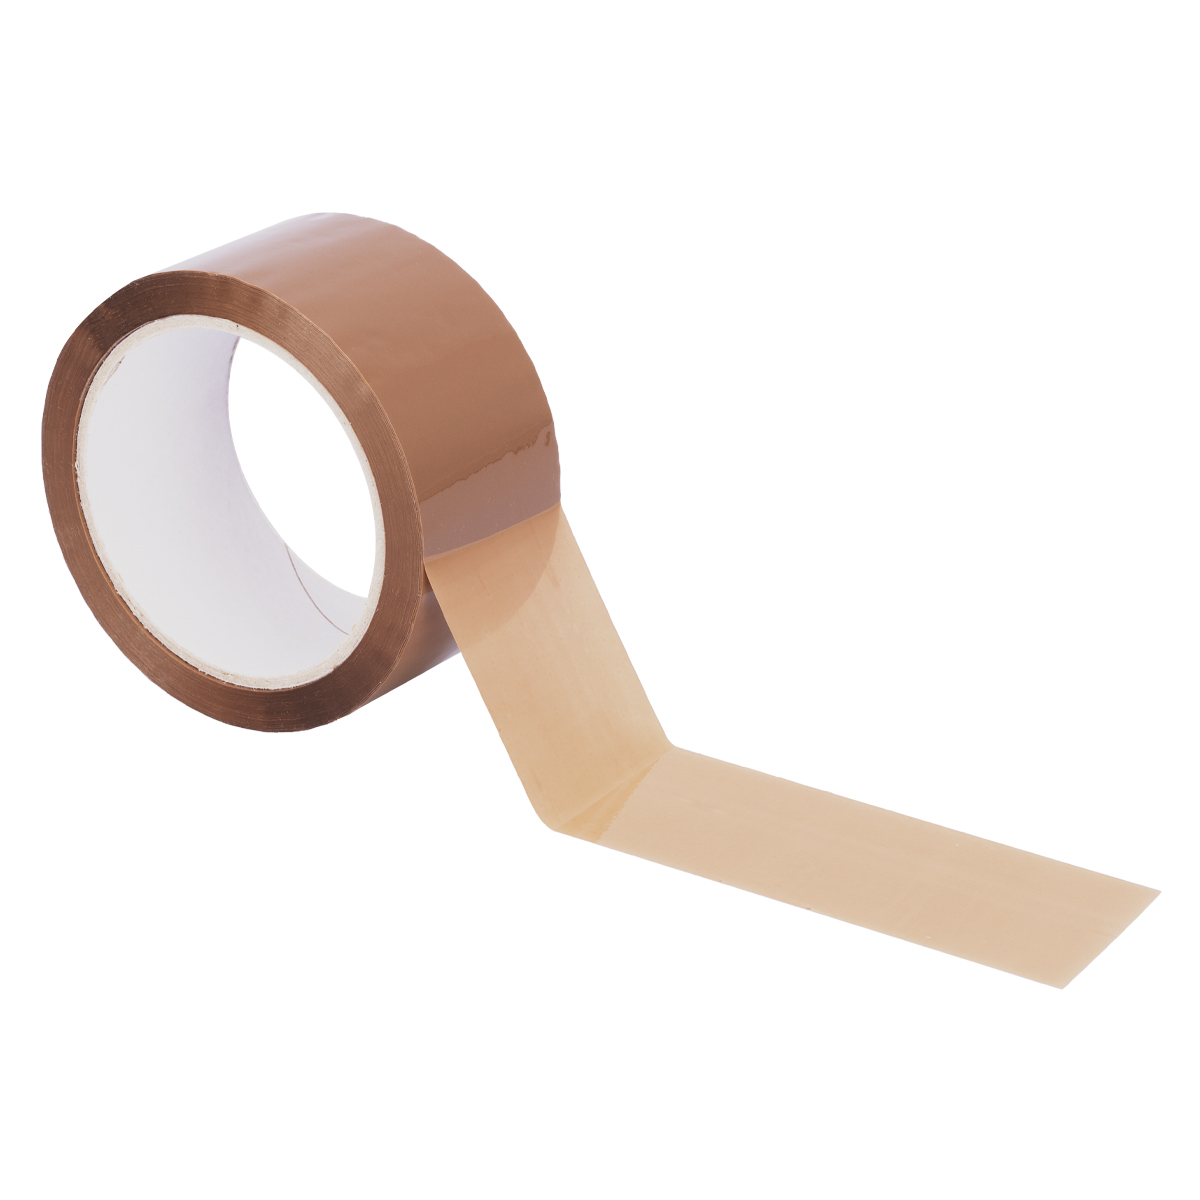 Adhesive tape pp 66m x 50mm Quiet unrolling Brown